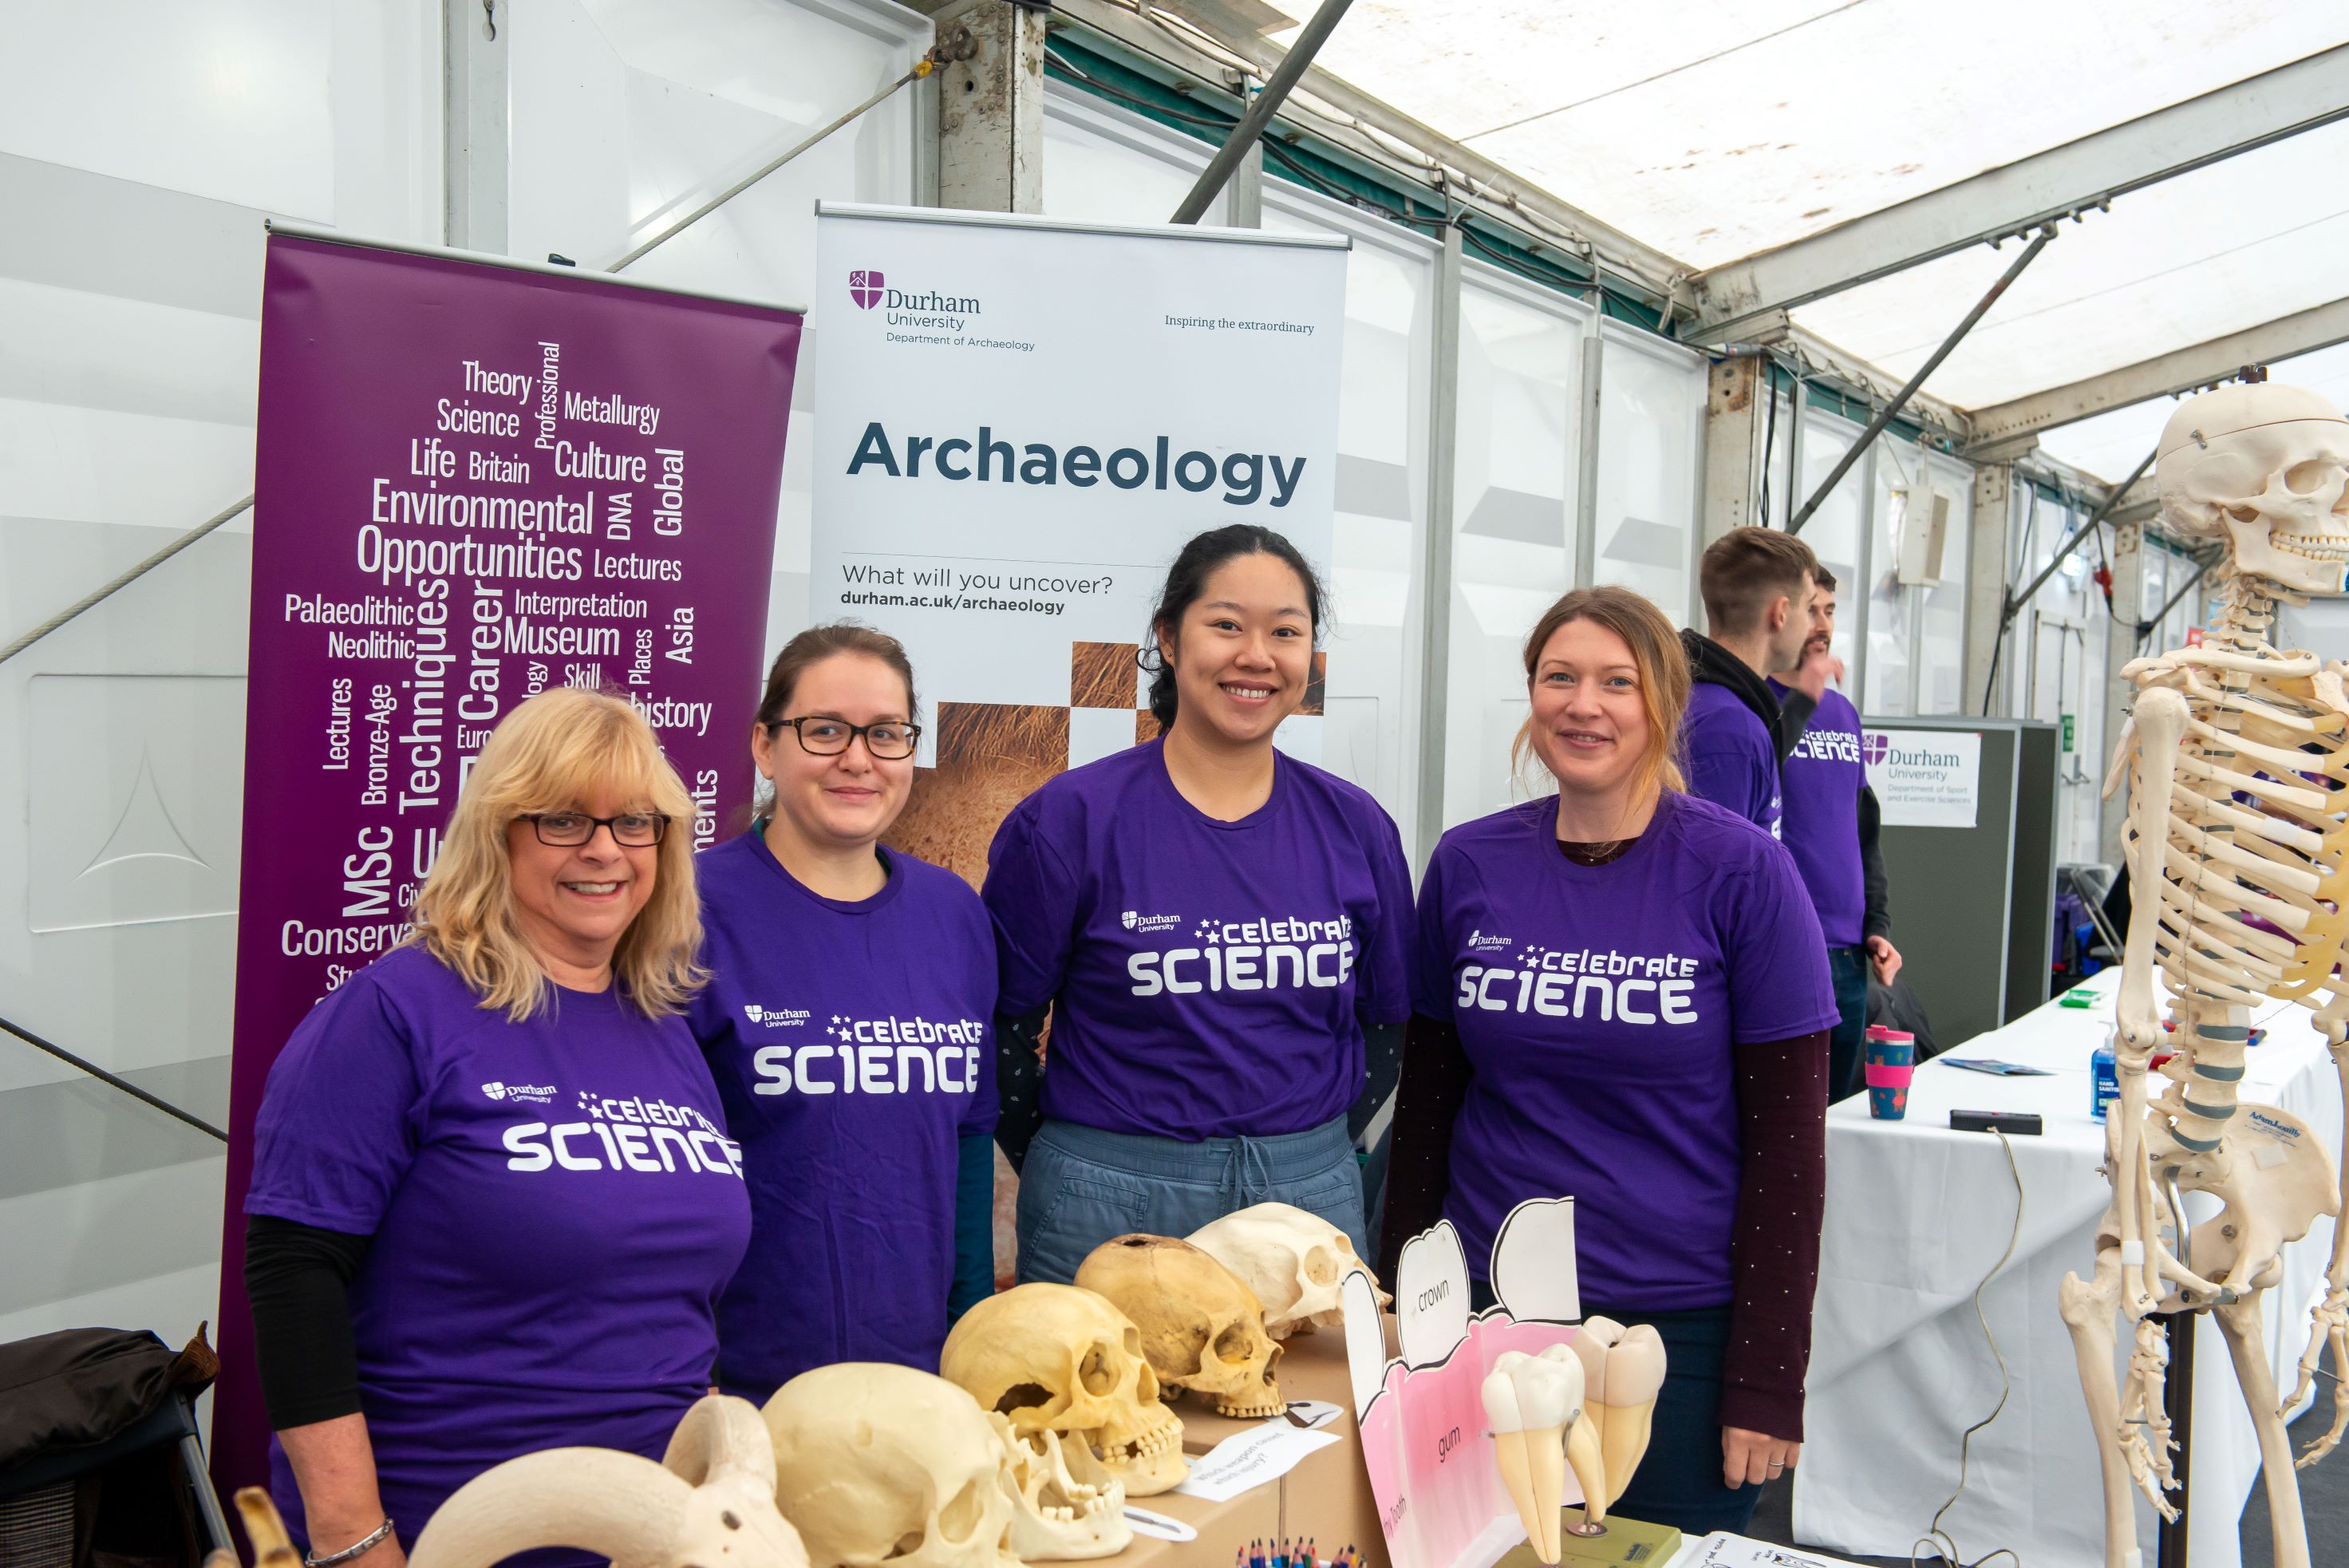 Group photo of four smiling Archaeology volunteers in purple shirts, standing behind a table with animal and human skull models on display. Behind them are pull-up banners advertising the Department of Archaeology.